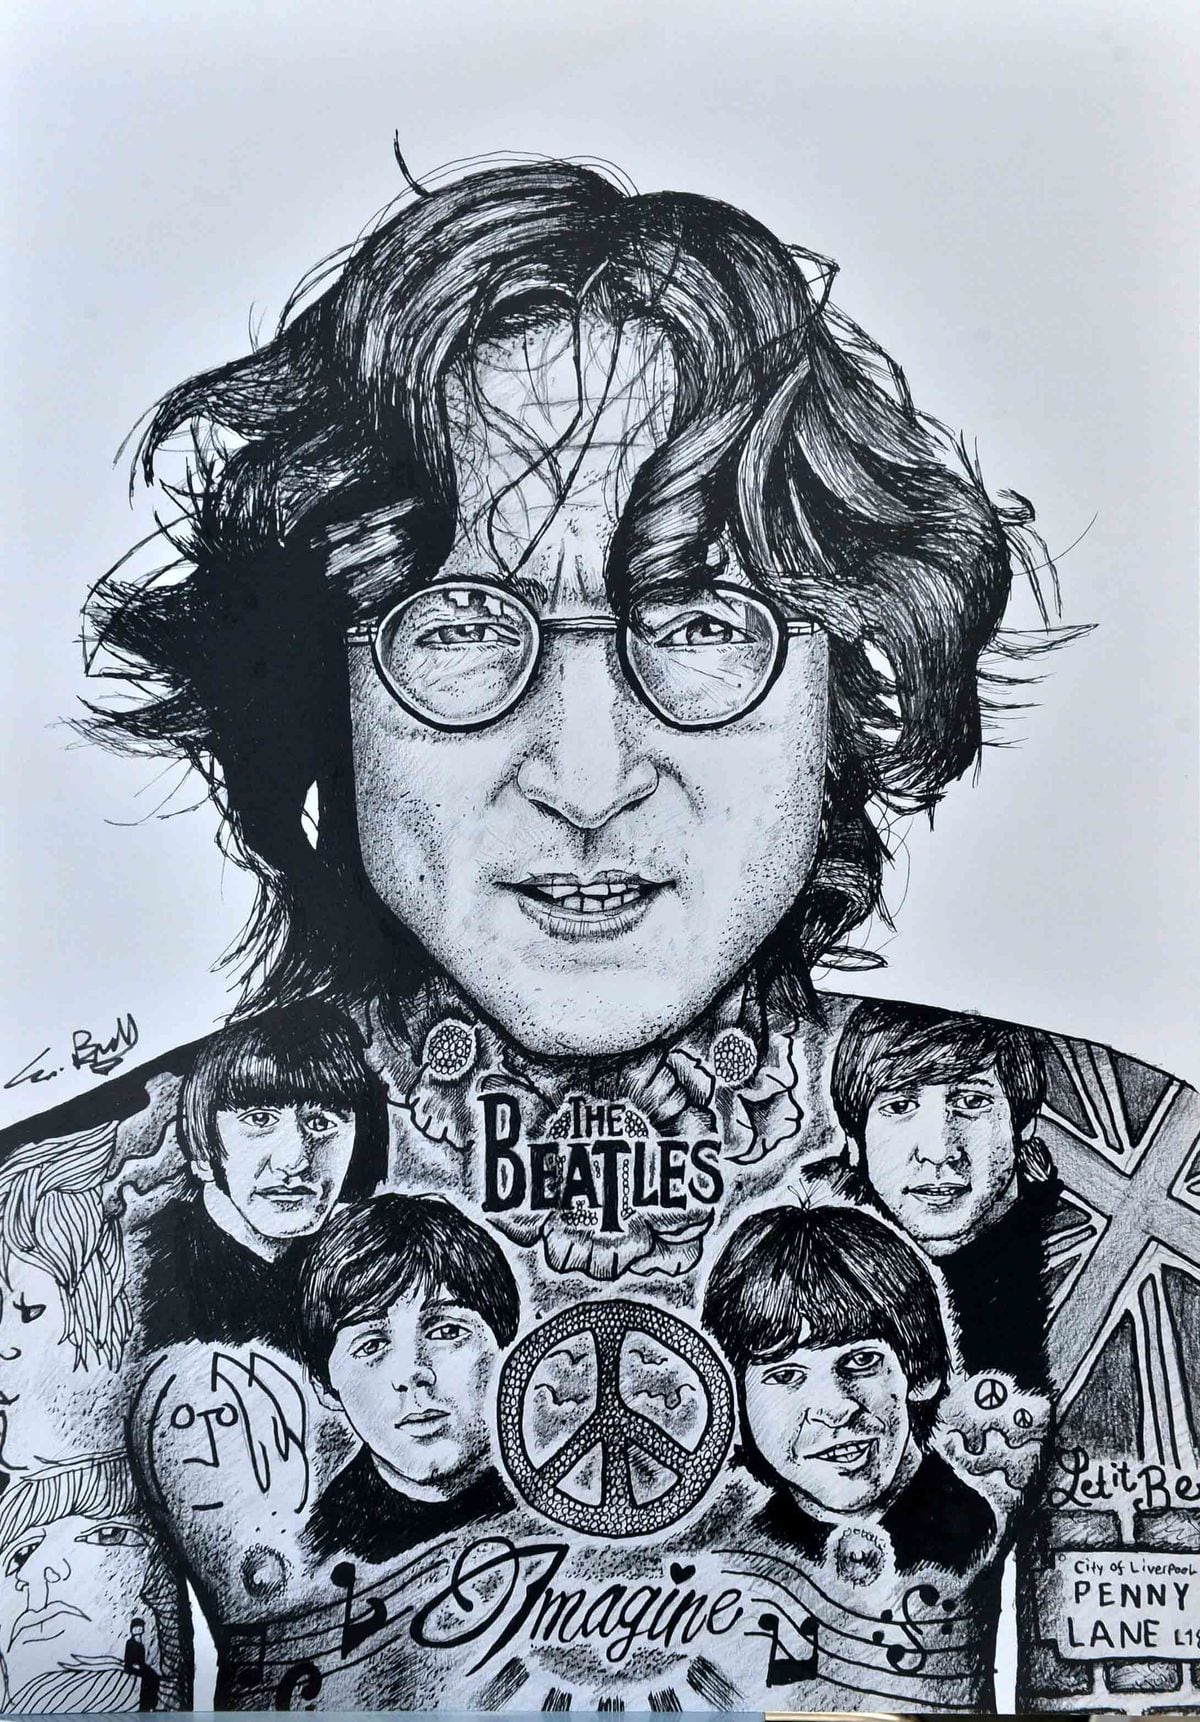 A Beatles inspired print